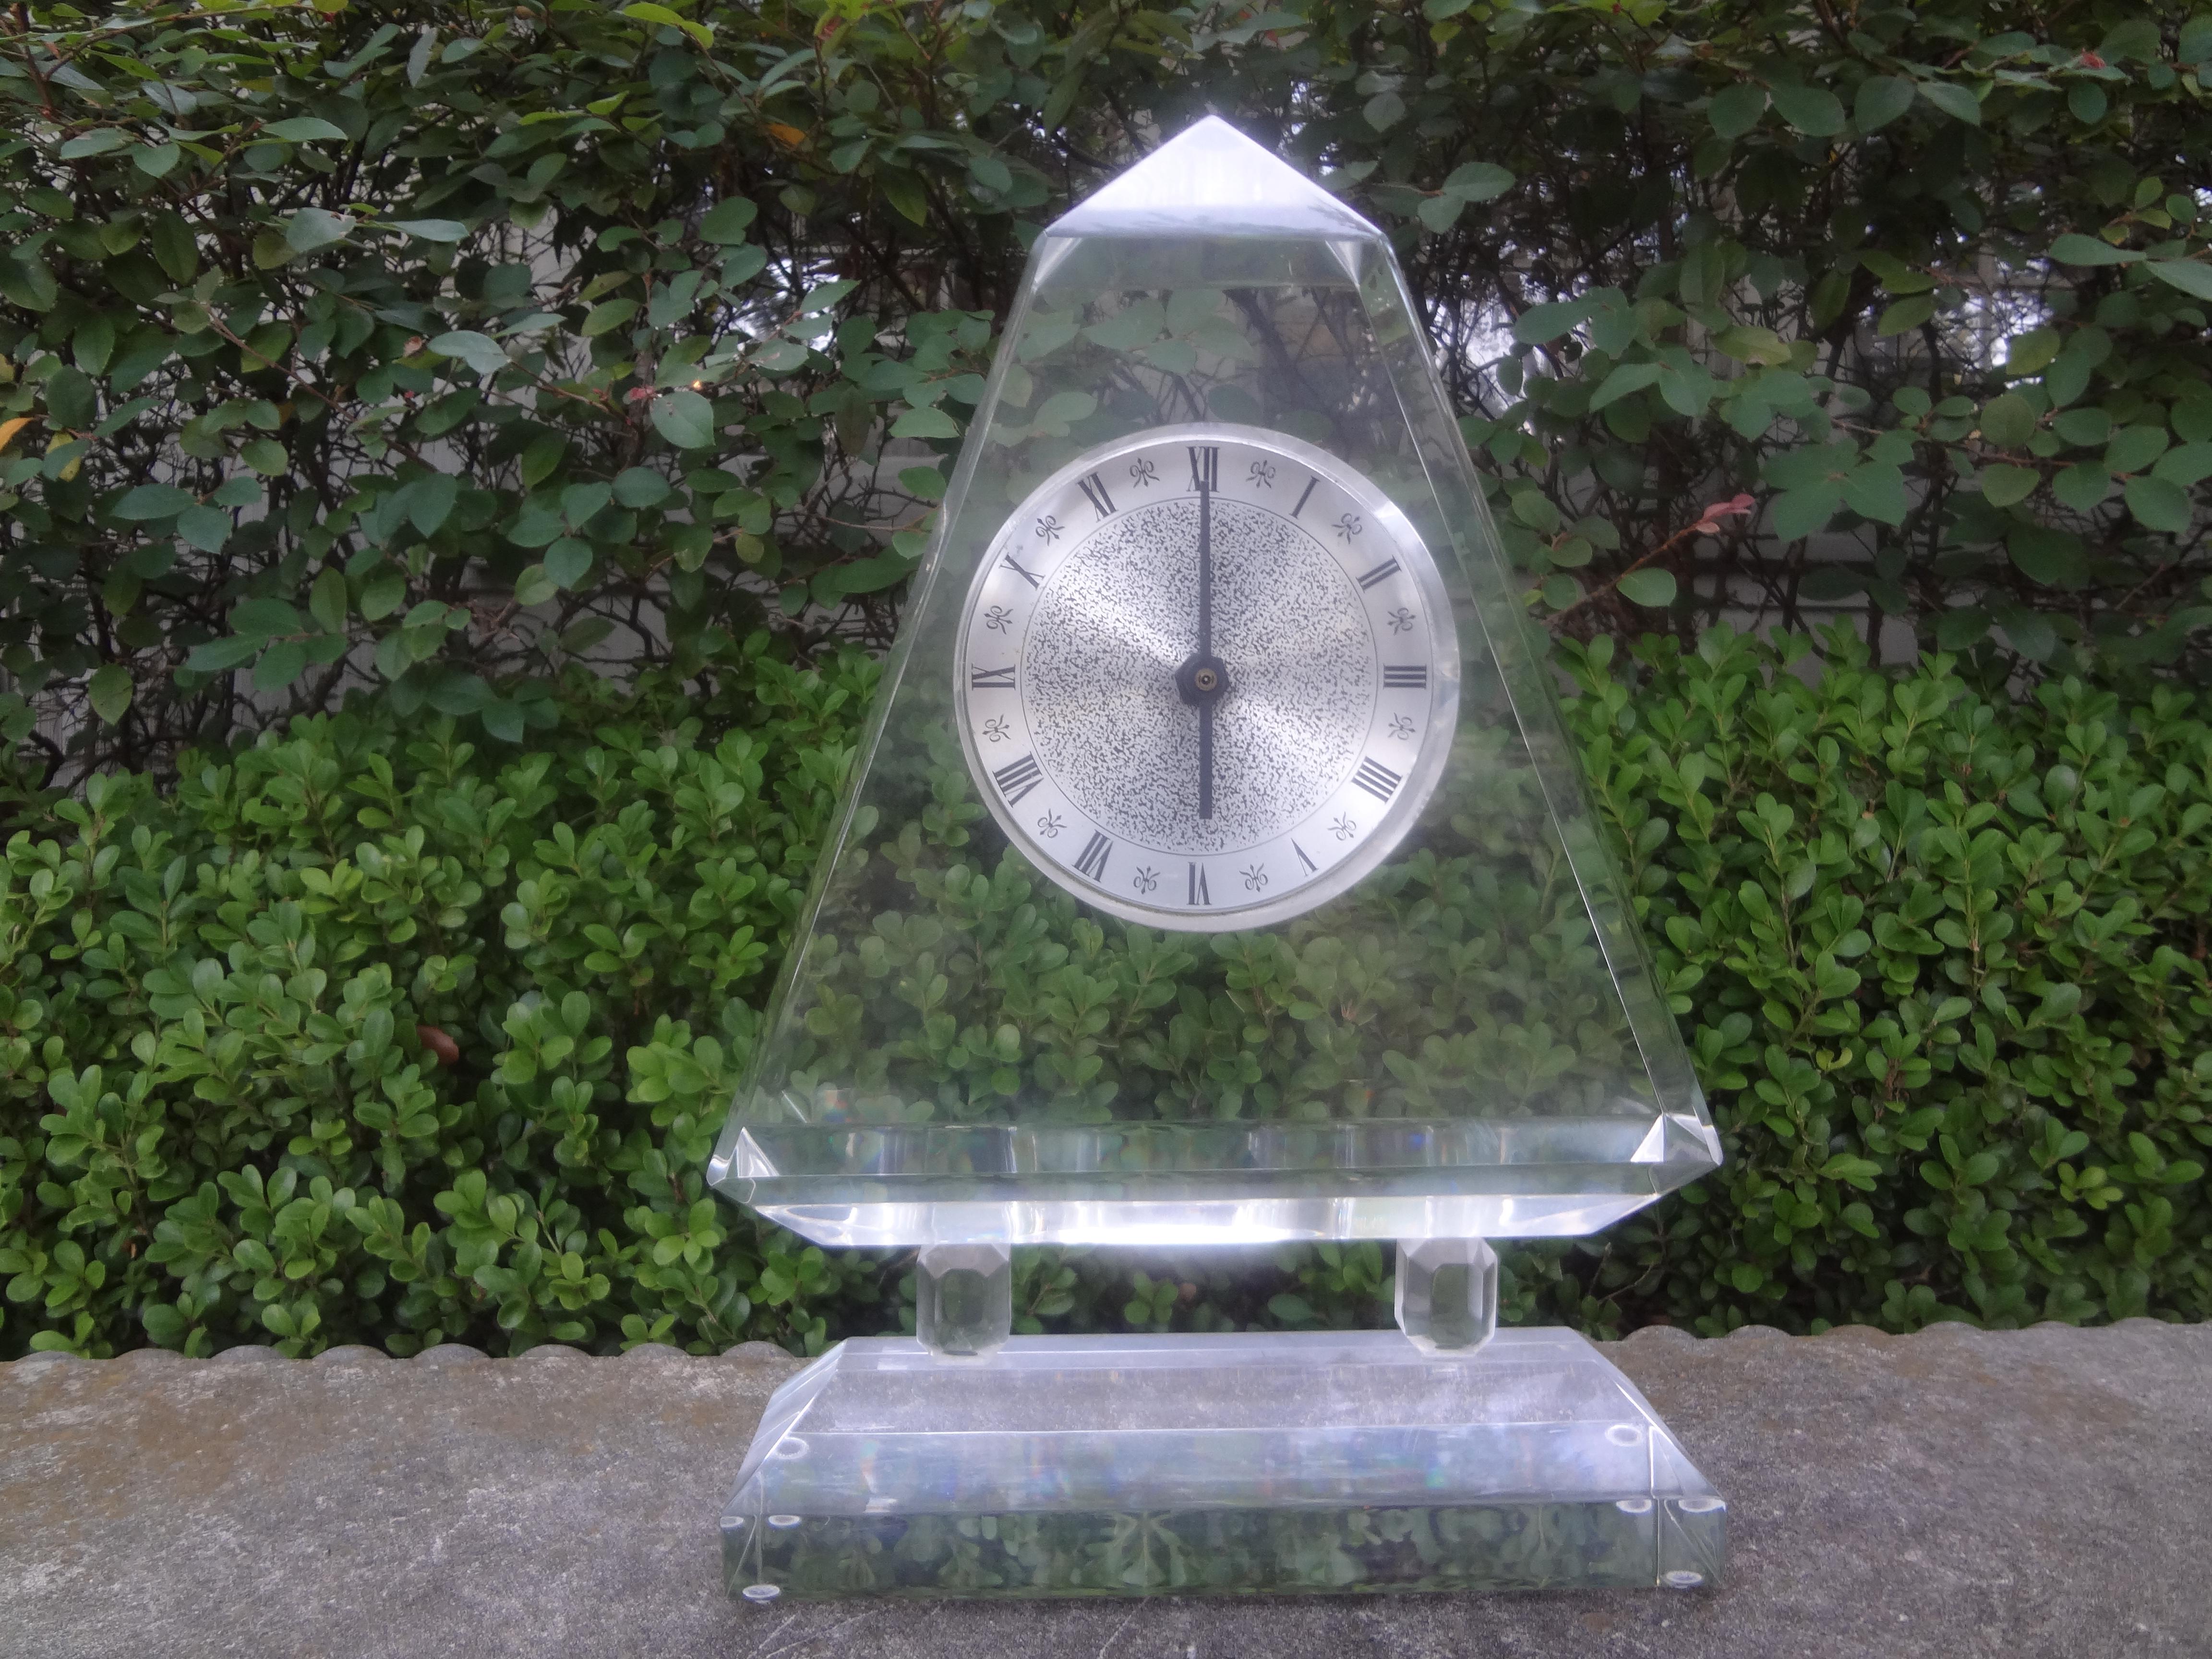 Mid Century Modern Acrylic Clock.
This beautiful mid century modern acrylic or lucite desk clock, table clock or mantel clock in a Neoclassical style and is battery operated. As with all clock sales, best to have checked by clock expert
Stunning mid